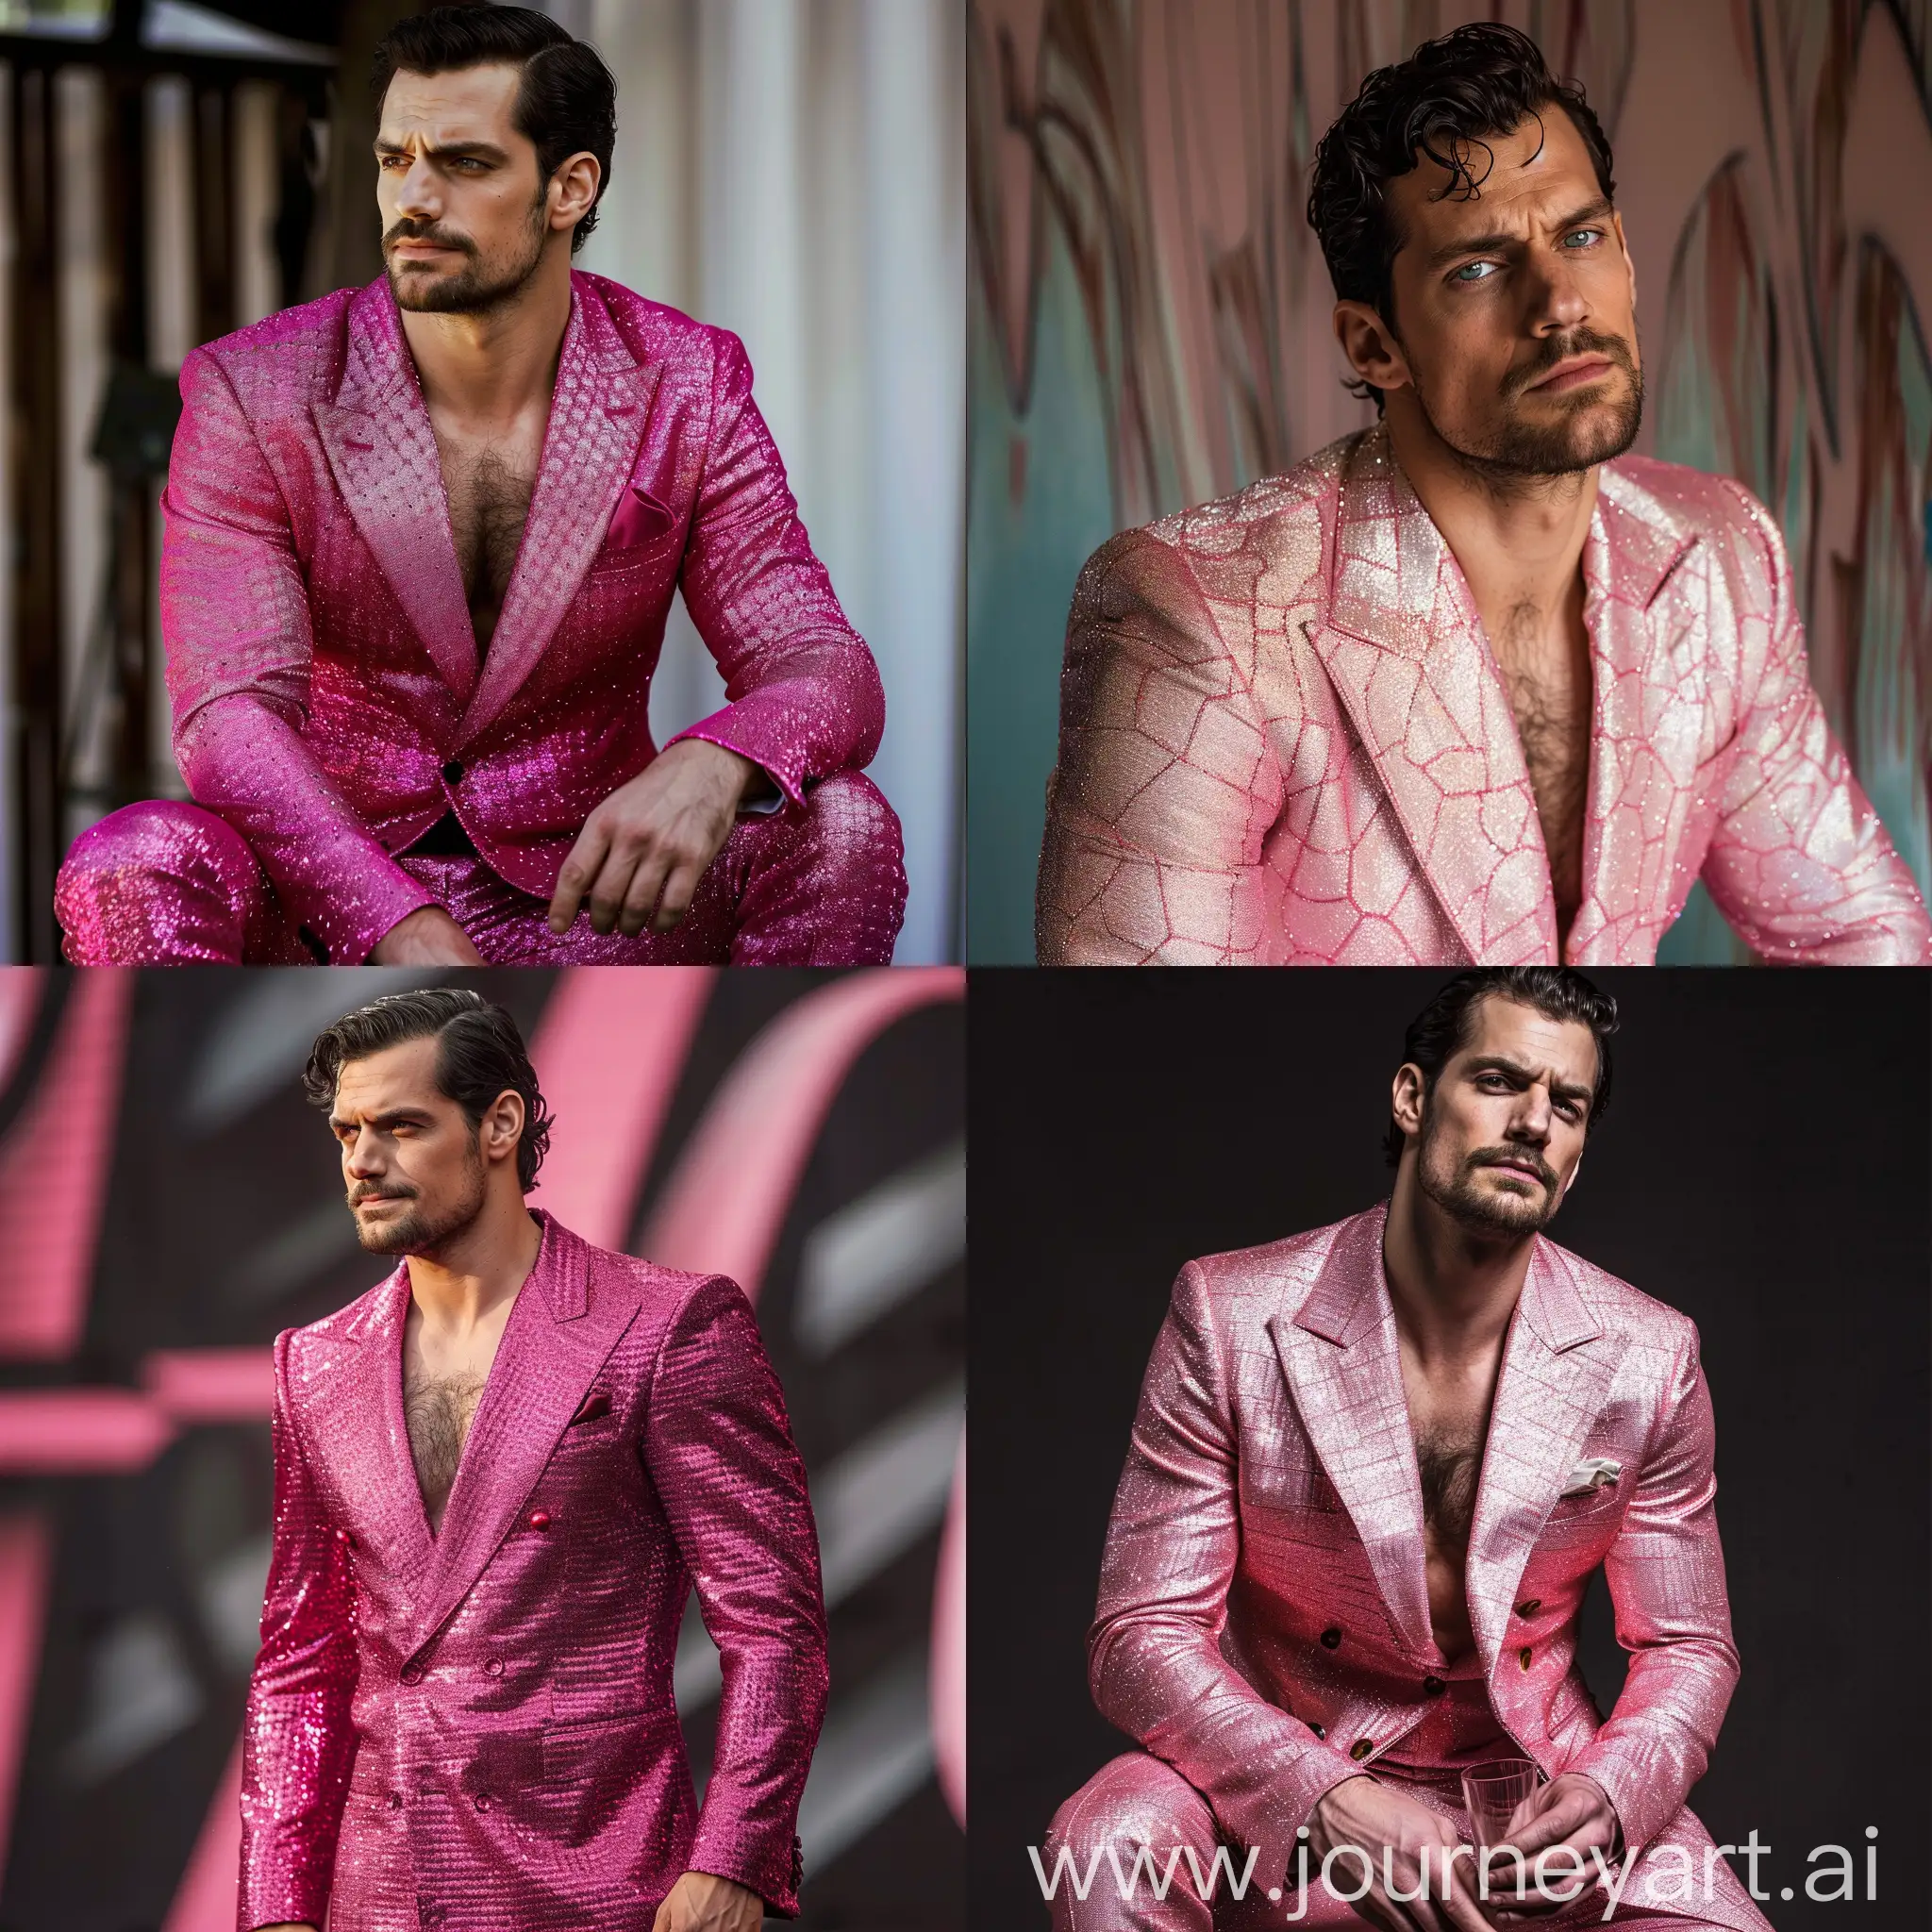 Henry Cavill wearing a pink suit, a pink glitter suit